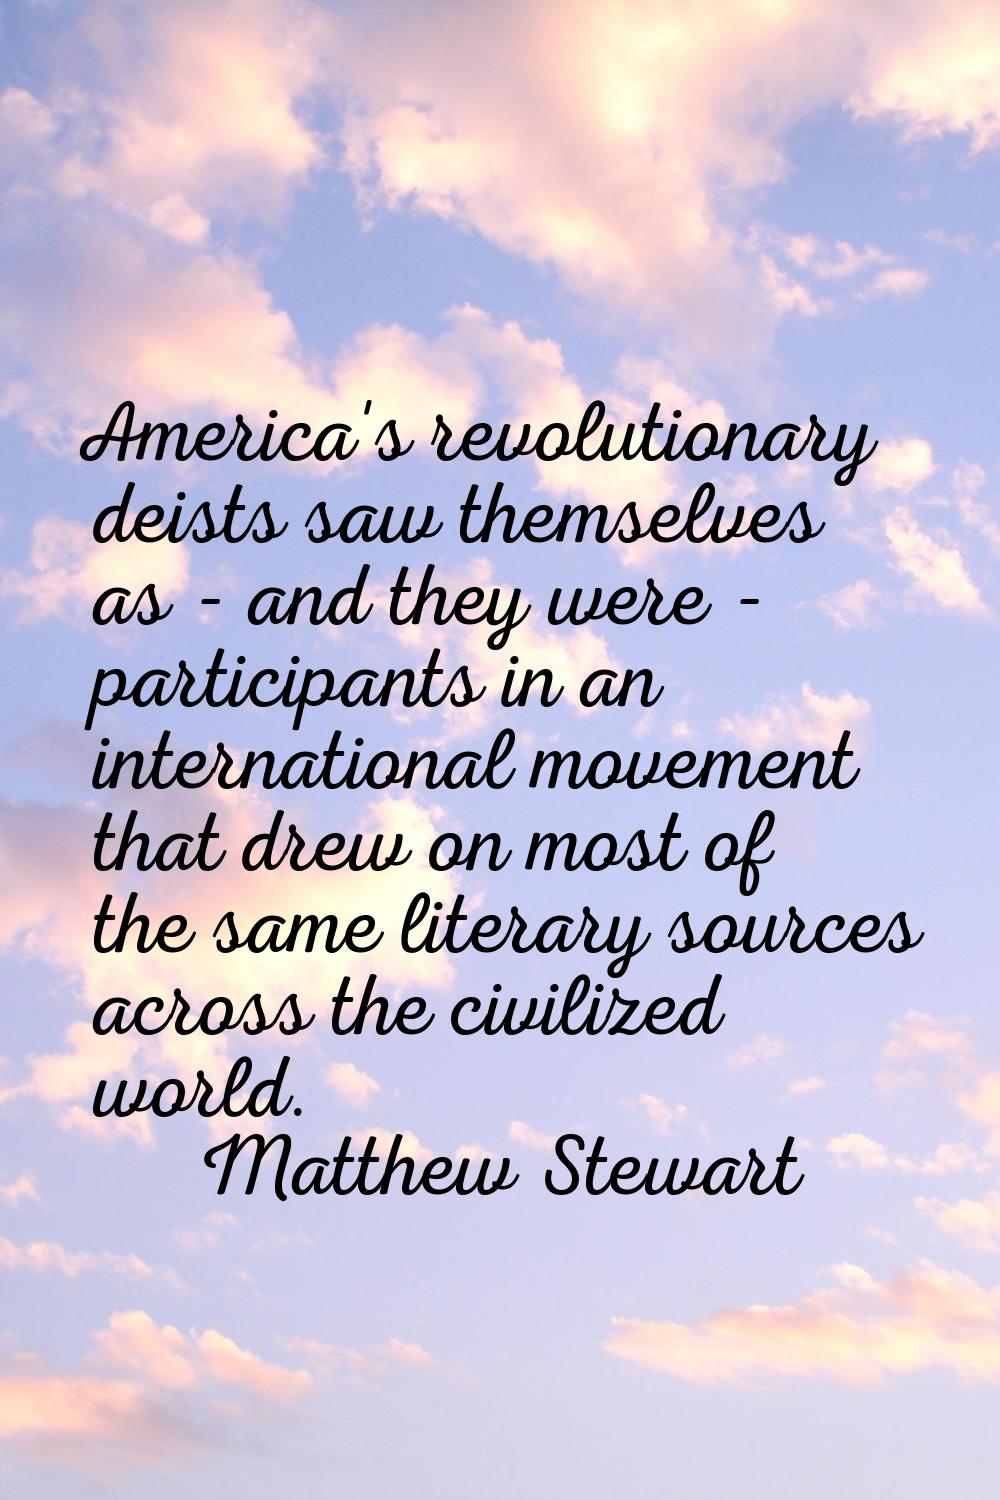 America's revolutionary deists saw themselves as - and they were - participants in an international